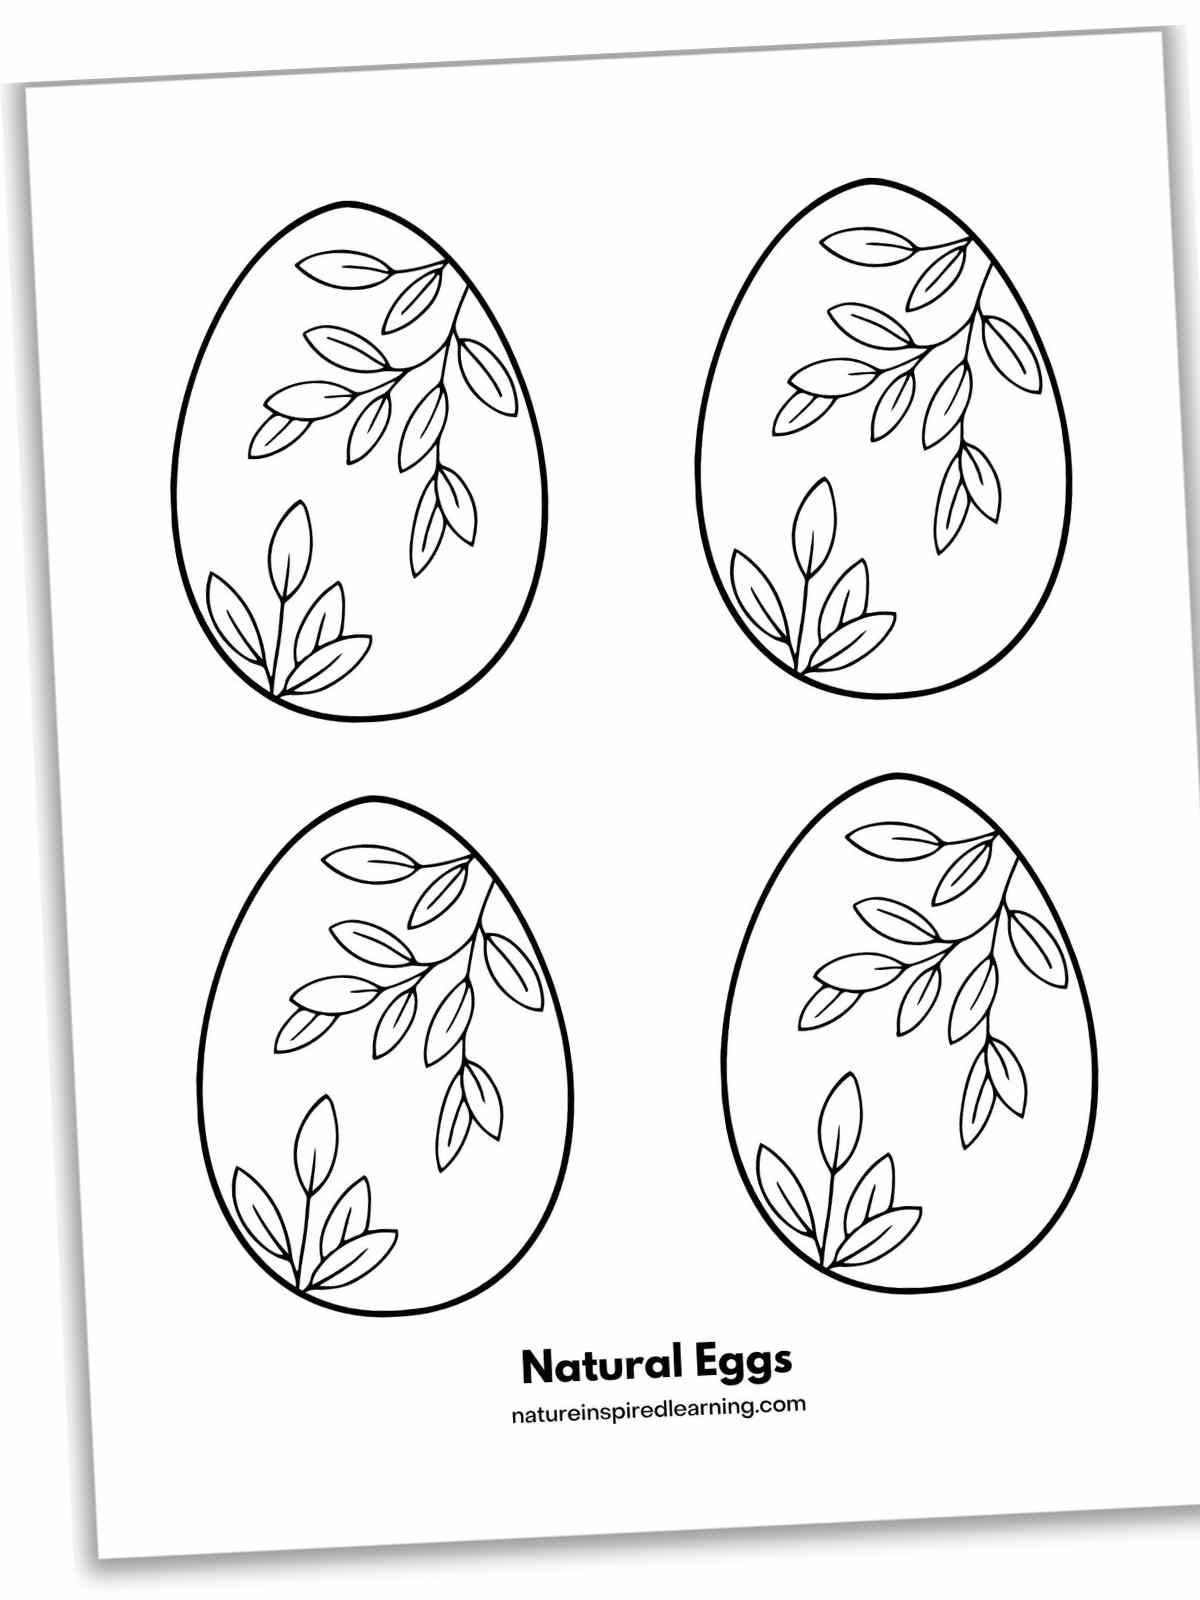 four eggs with leaf designs on each arranged in two rows of two